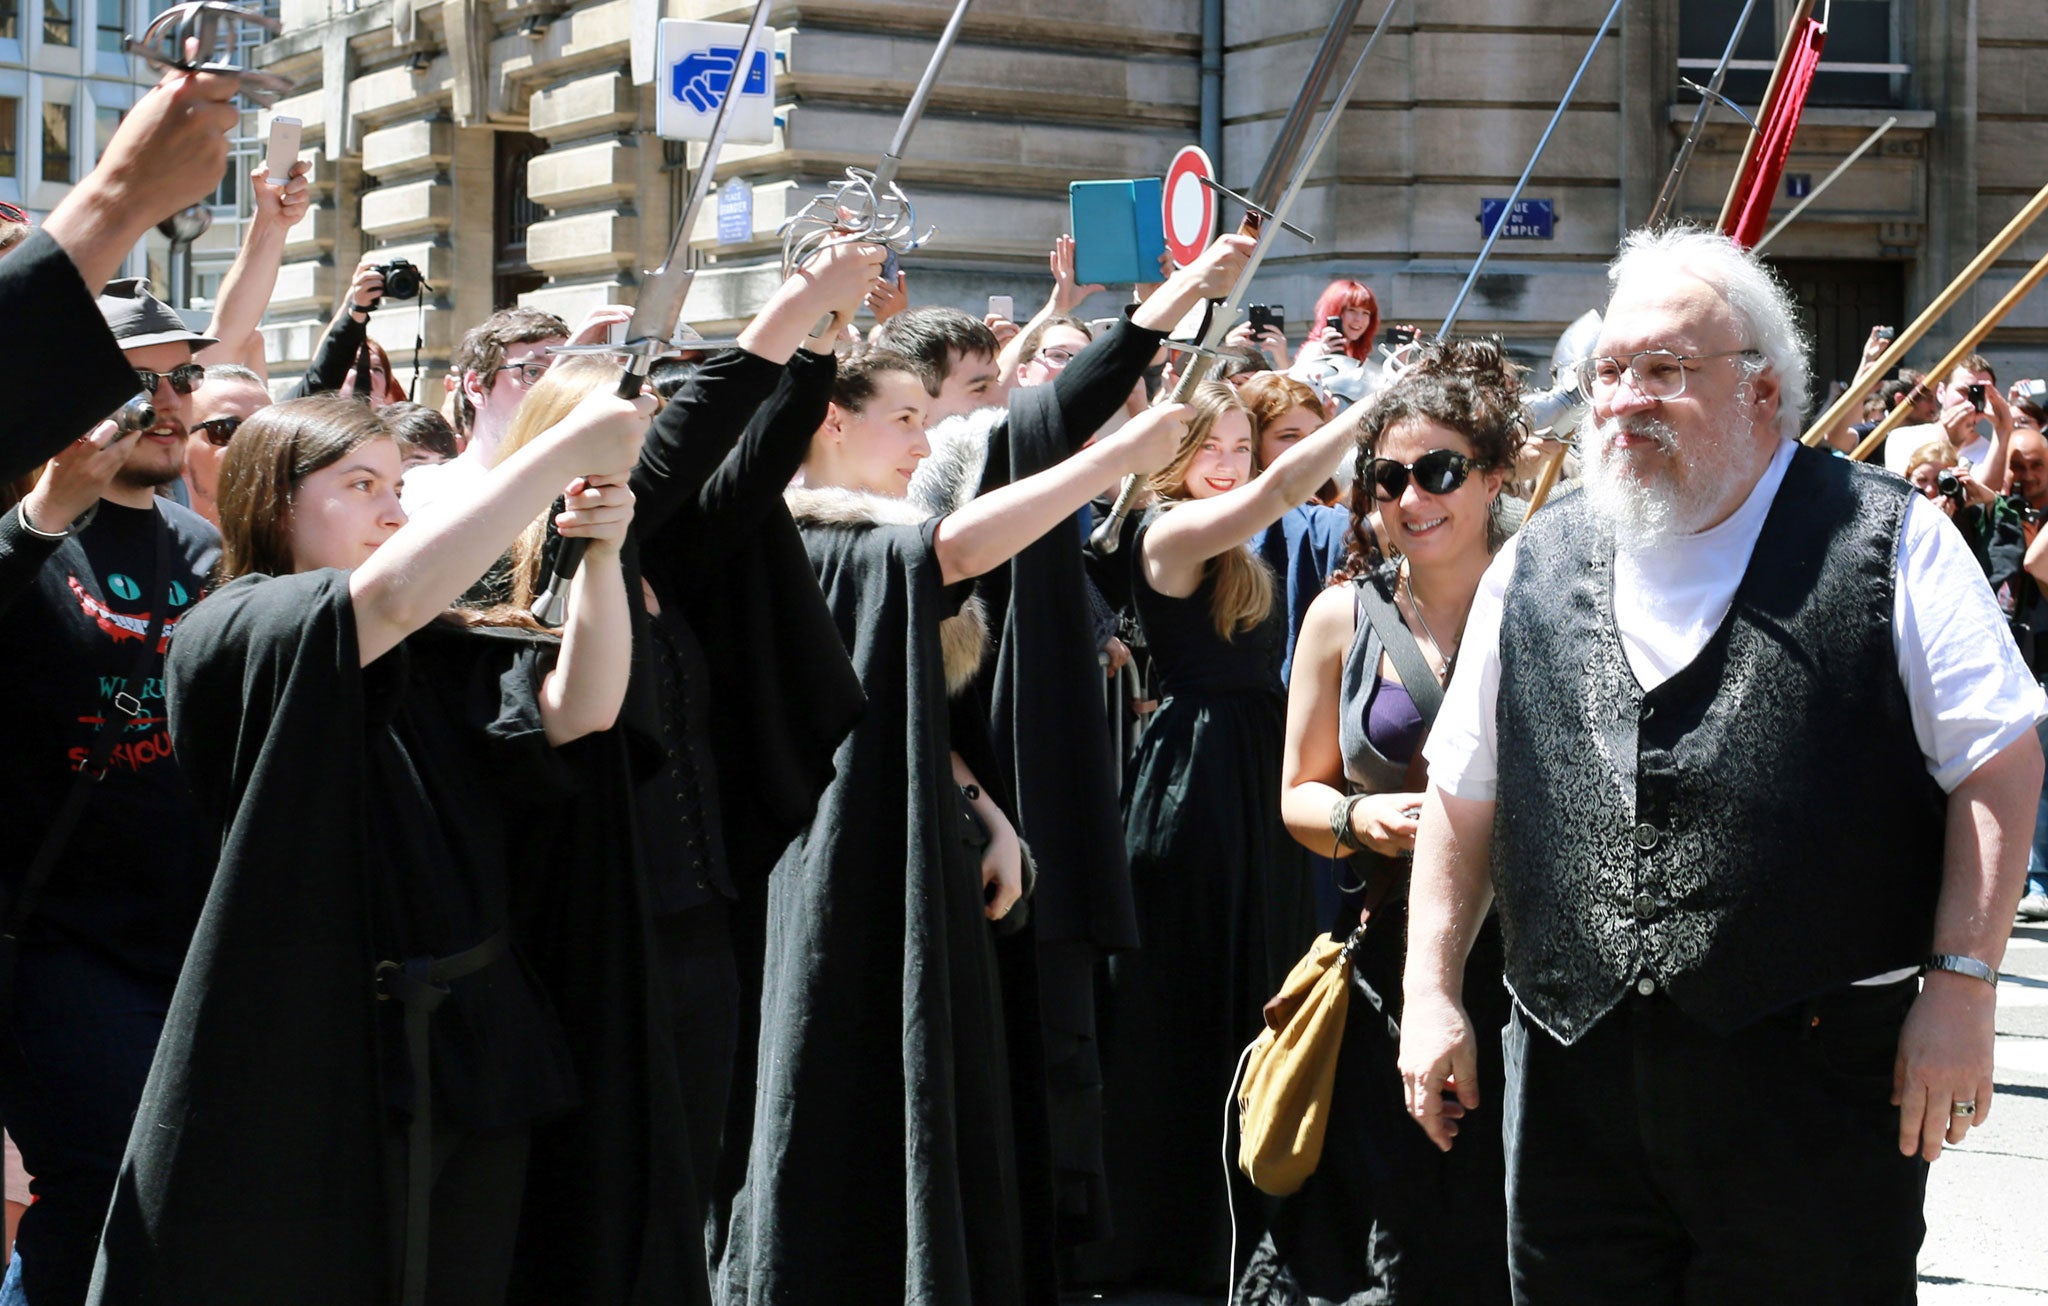 George RR Martin is greeted by fans before attending a book signing in France